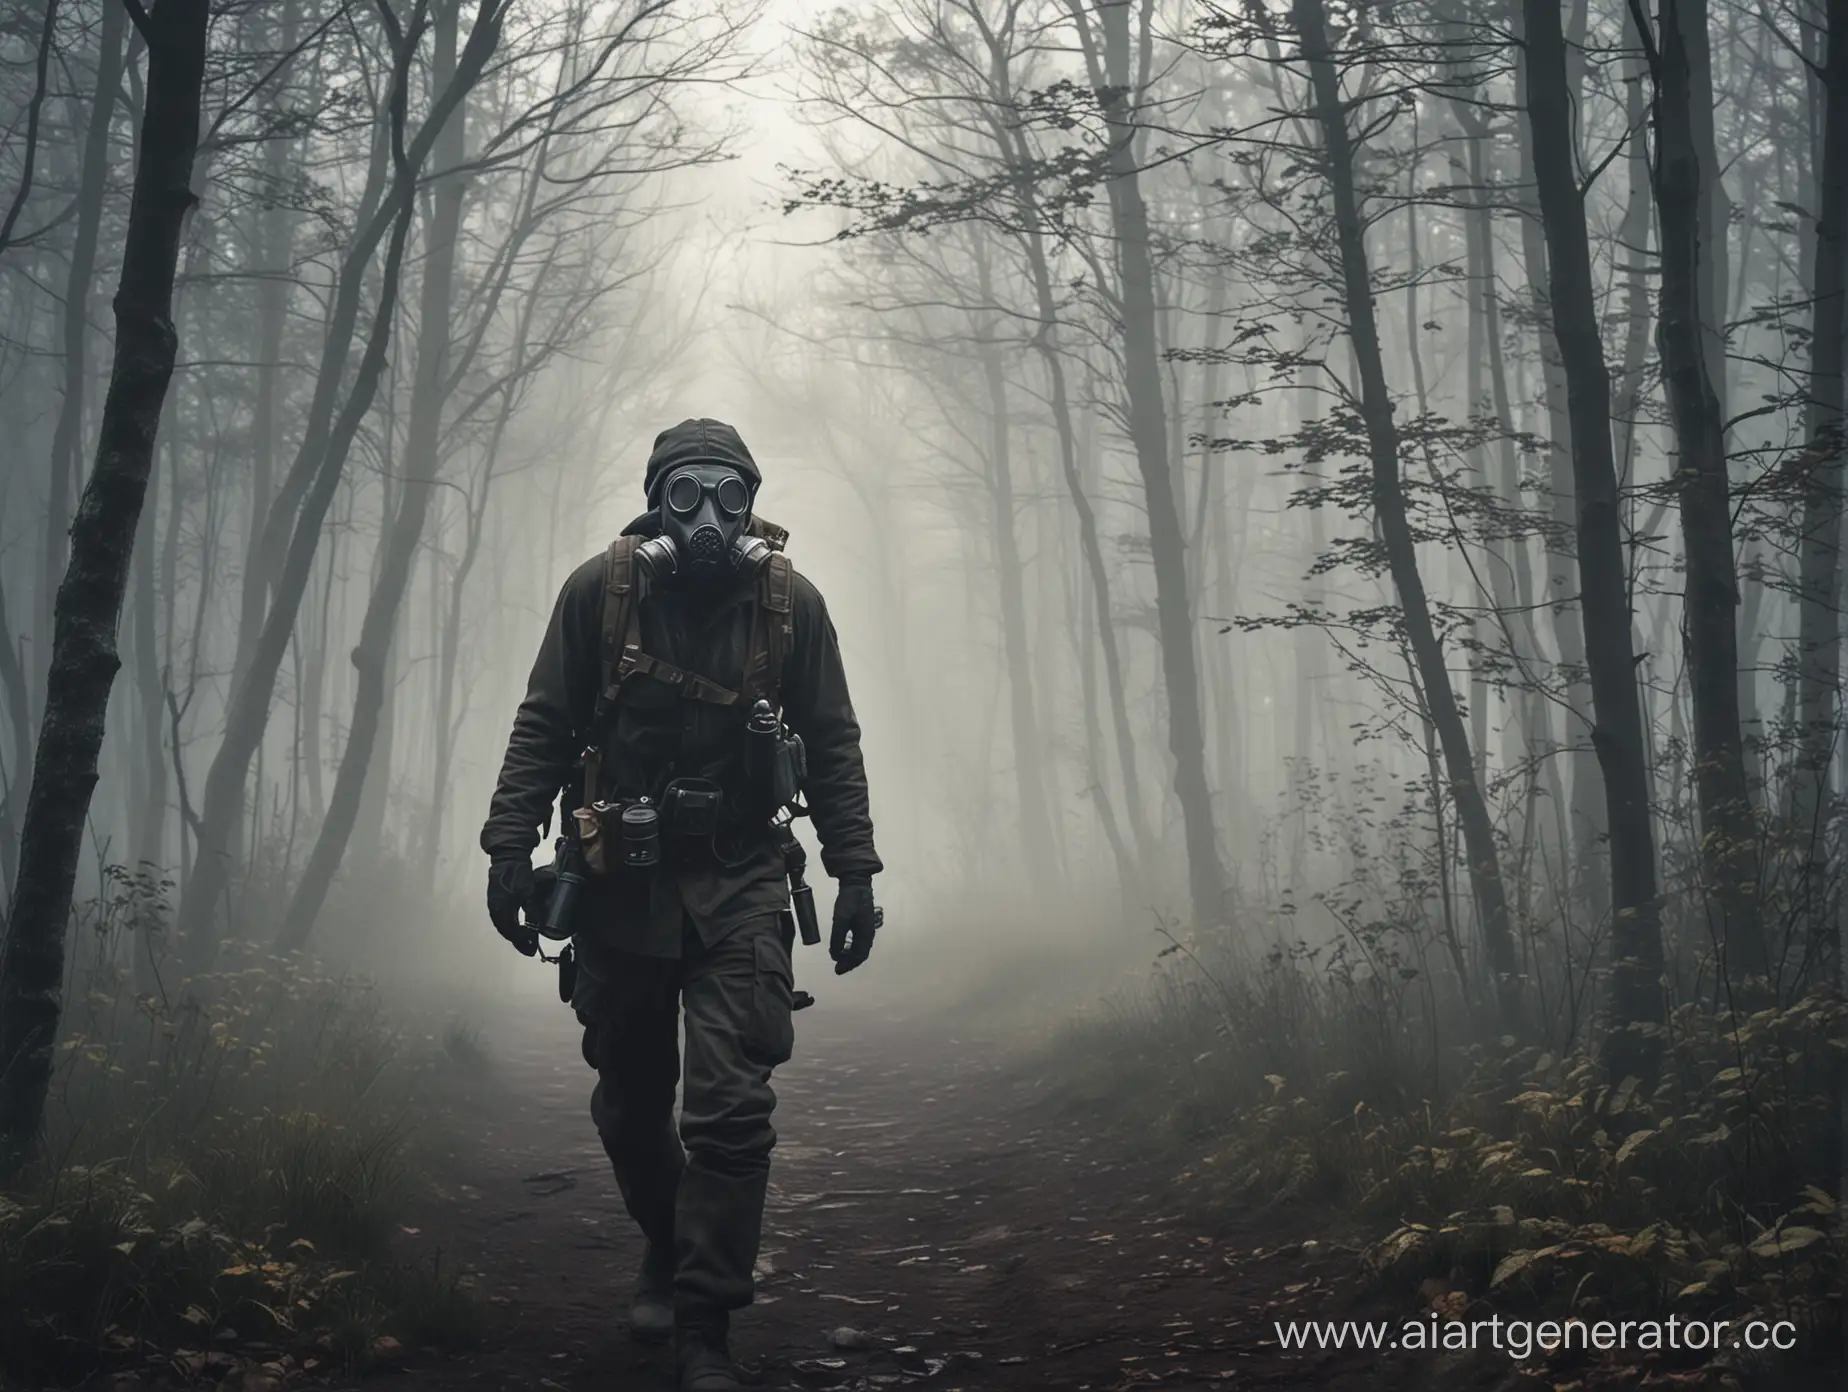 STALKER-Game-Fan-Art-Nighttime-Forest-Exploration-with-Gas-Mask